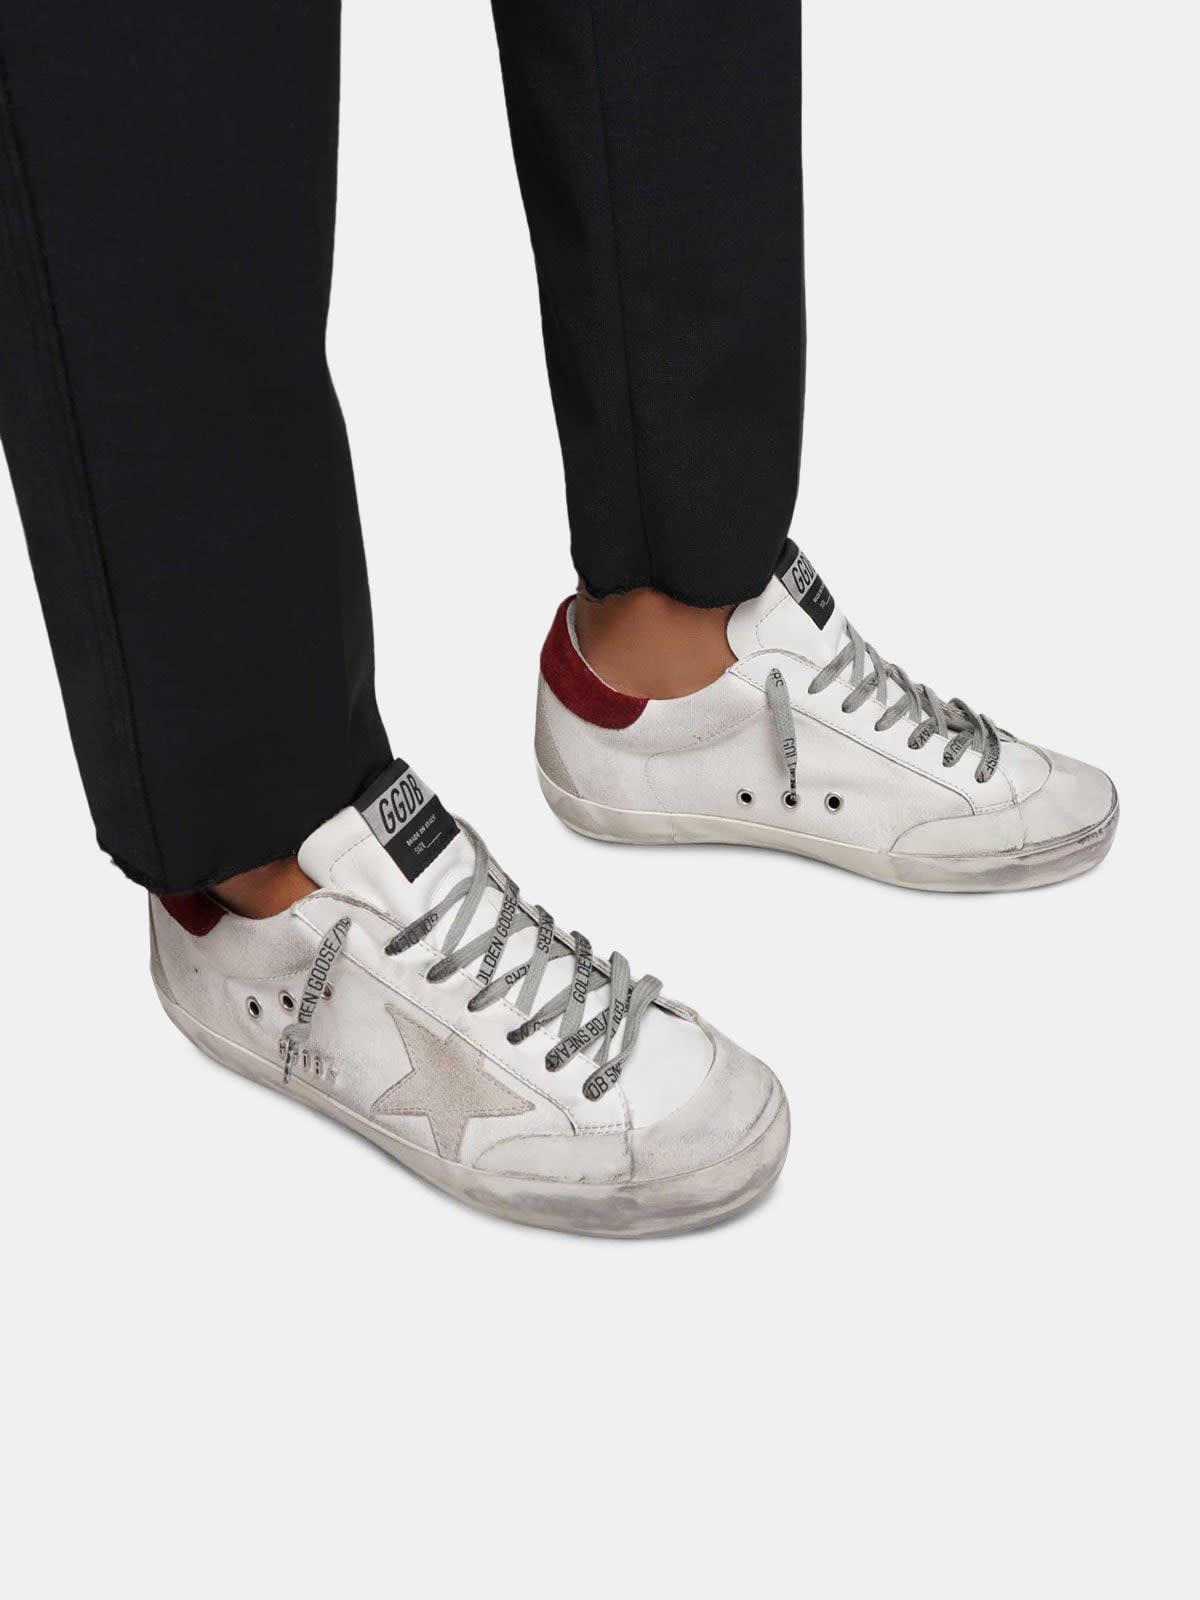 Super-Star sneakers with rubber toe cap